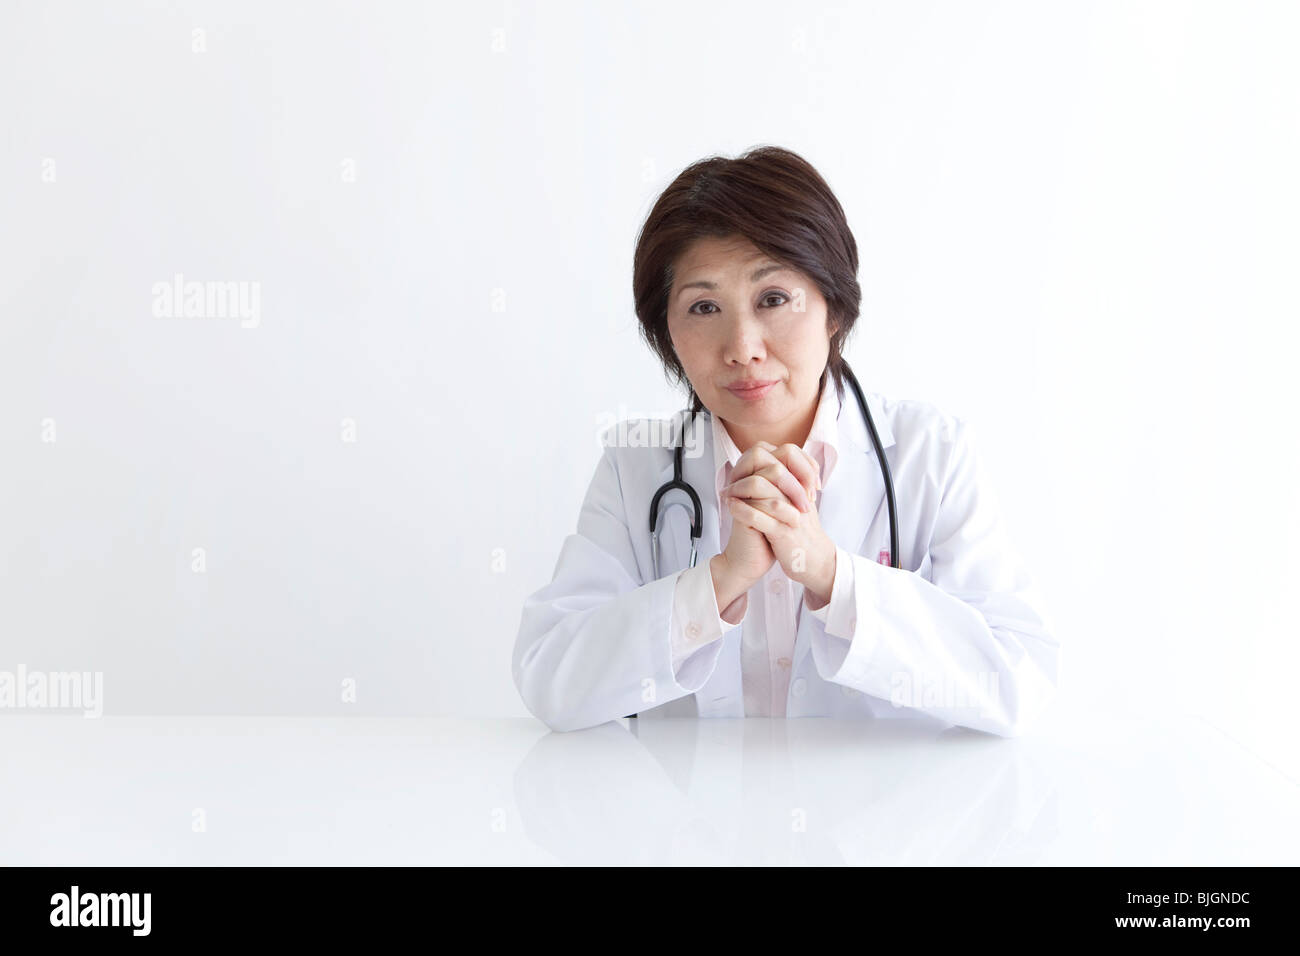 Doctor sitting with hands clasped Stock Photo